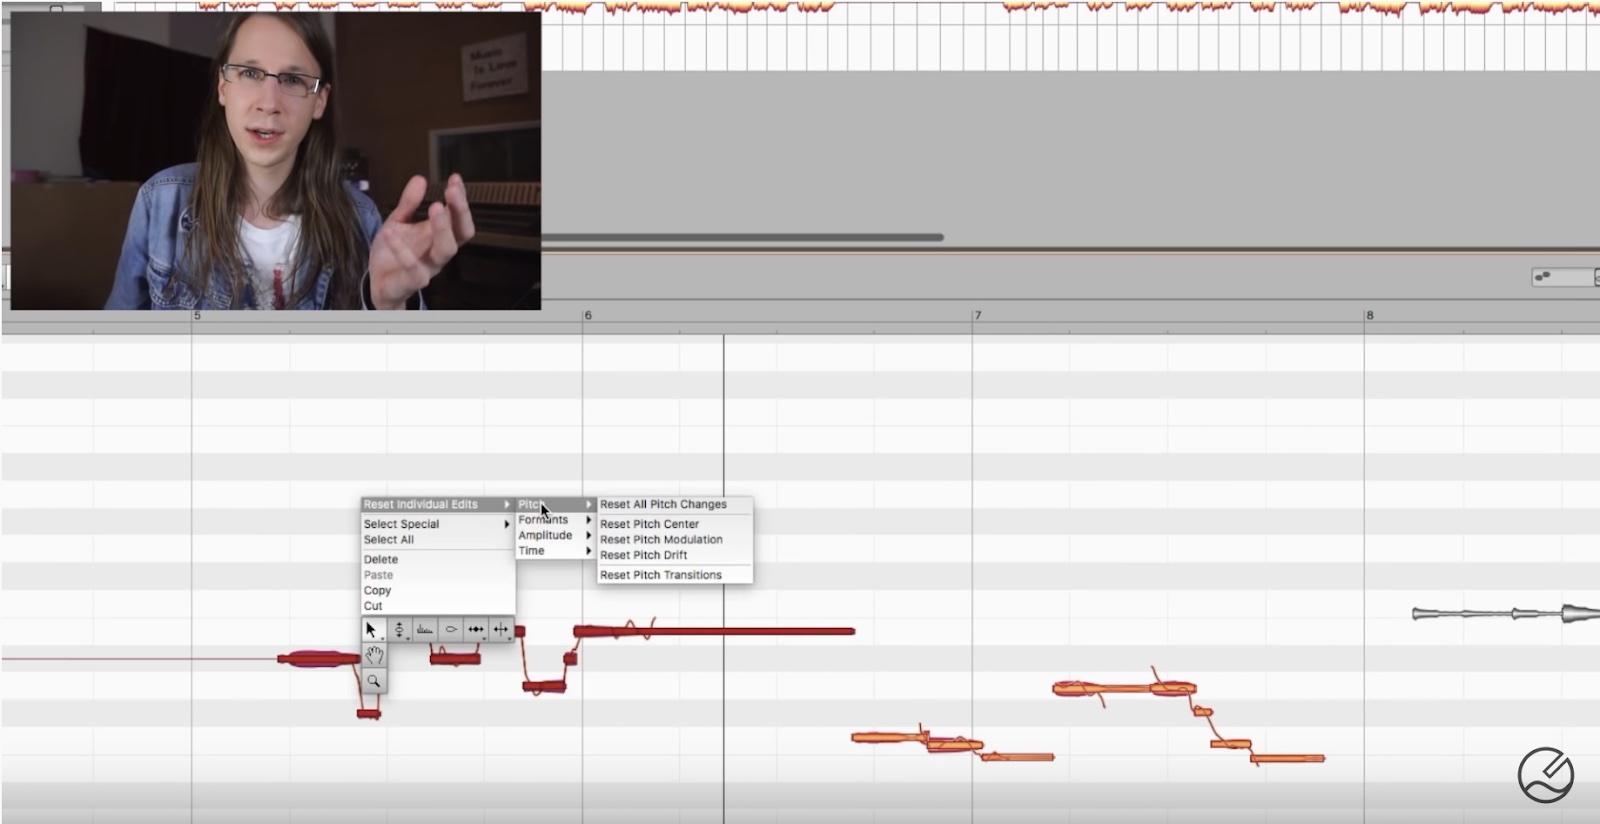 Screenshot of the YouTube tutorial video, “How to Use MELODYNE in a natural way?” Melodyne interface shown with “note blobs” and the editing dropdown menu displayed. Upper-left corner the instructor is displayed, making a hand gesture as though mid-sentence. 